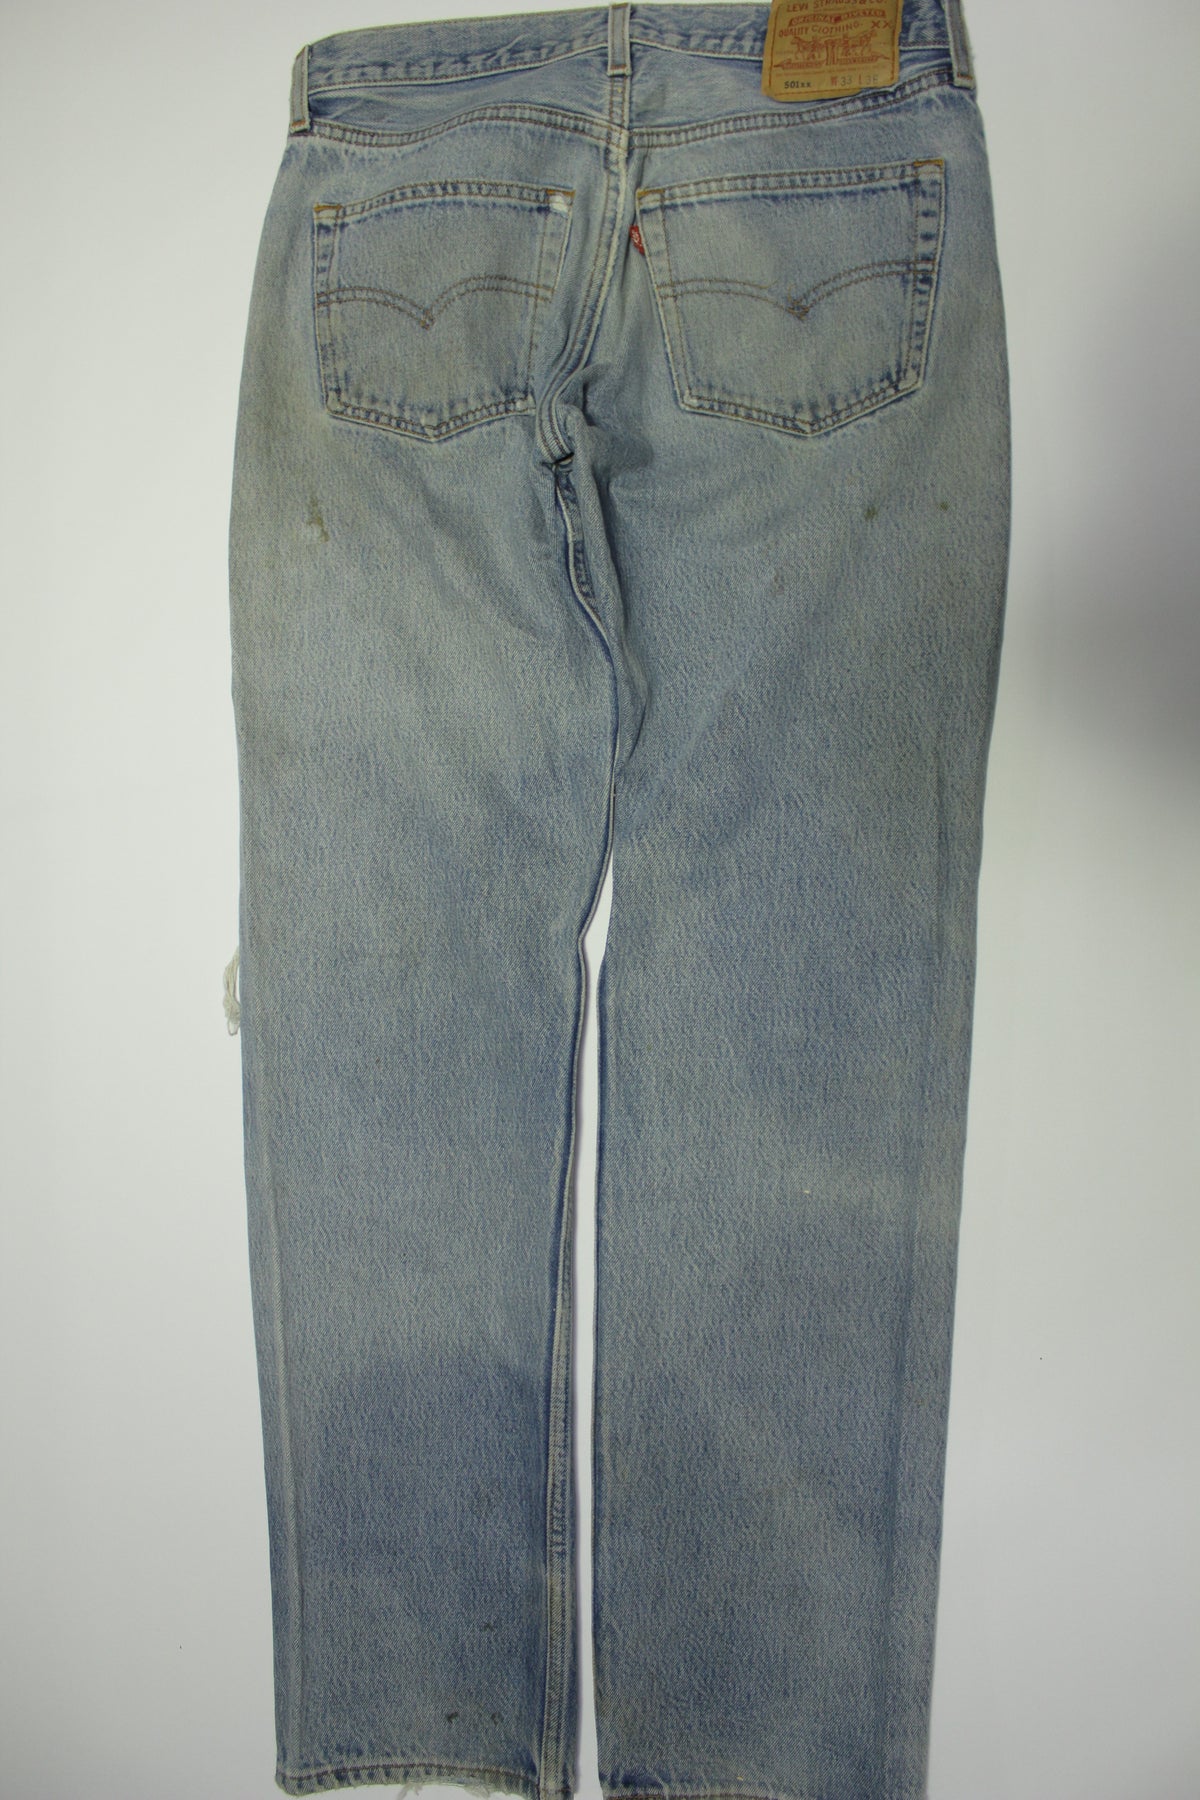 Levis 501xx Red Tab Vintage 90's Made in USA Button Fly Denim Grunge Rocker Jeans